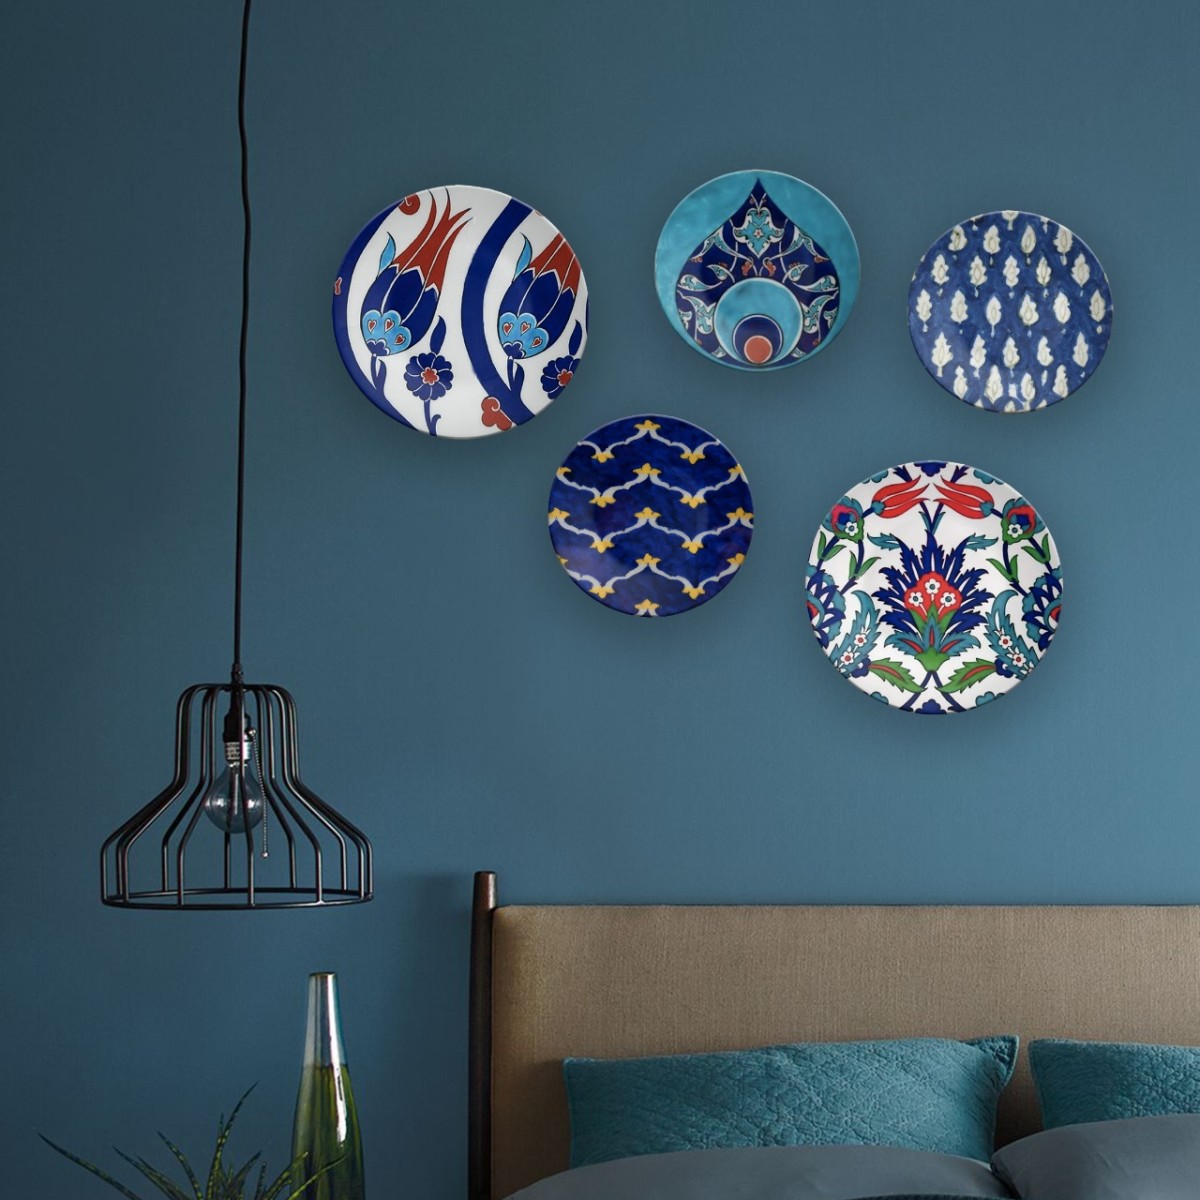 Design A Pacific Ambience With Decorative Wall Plates